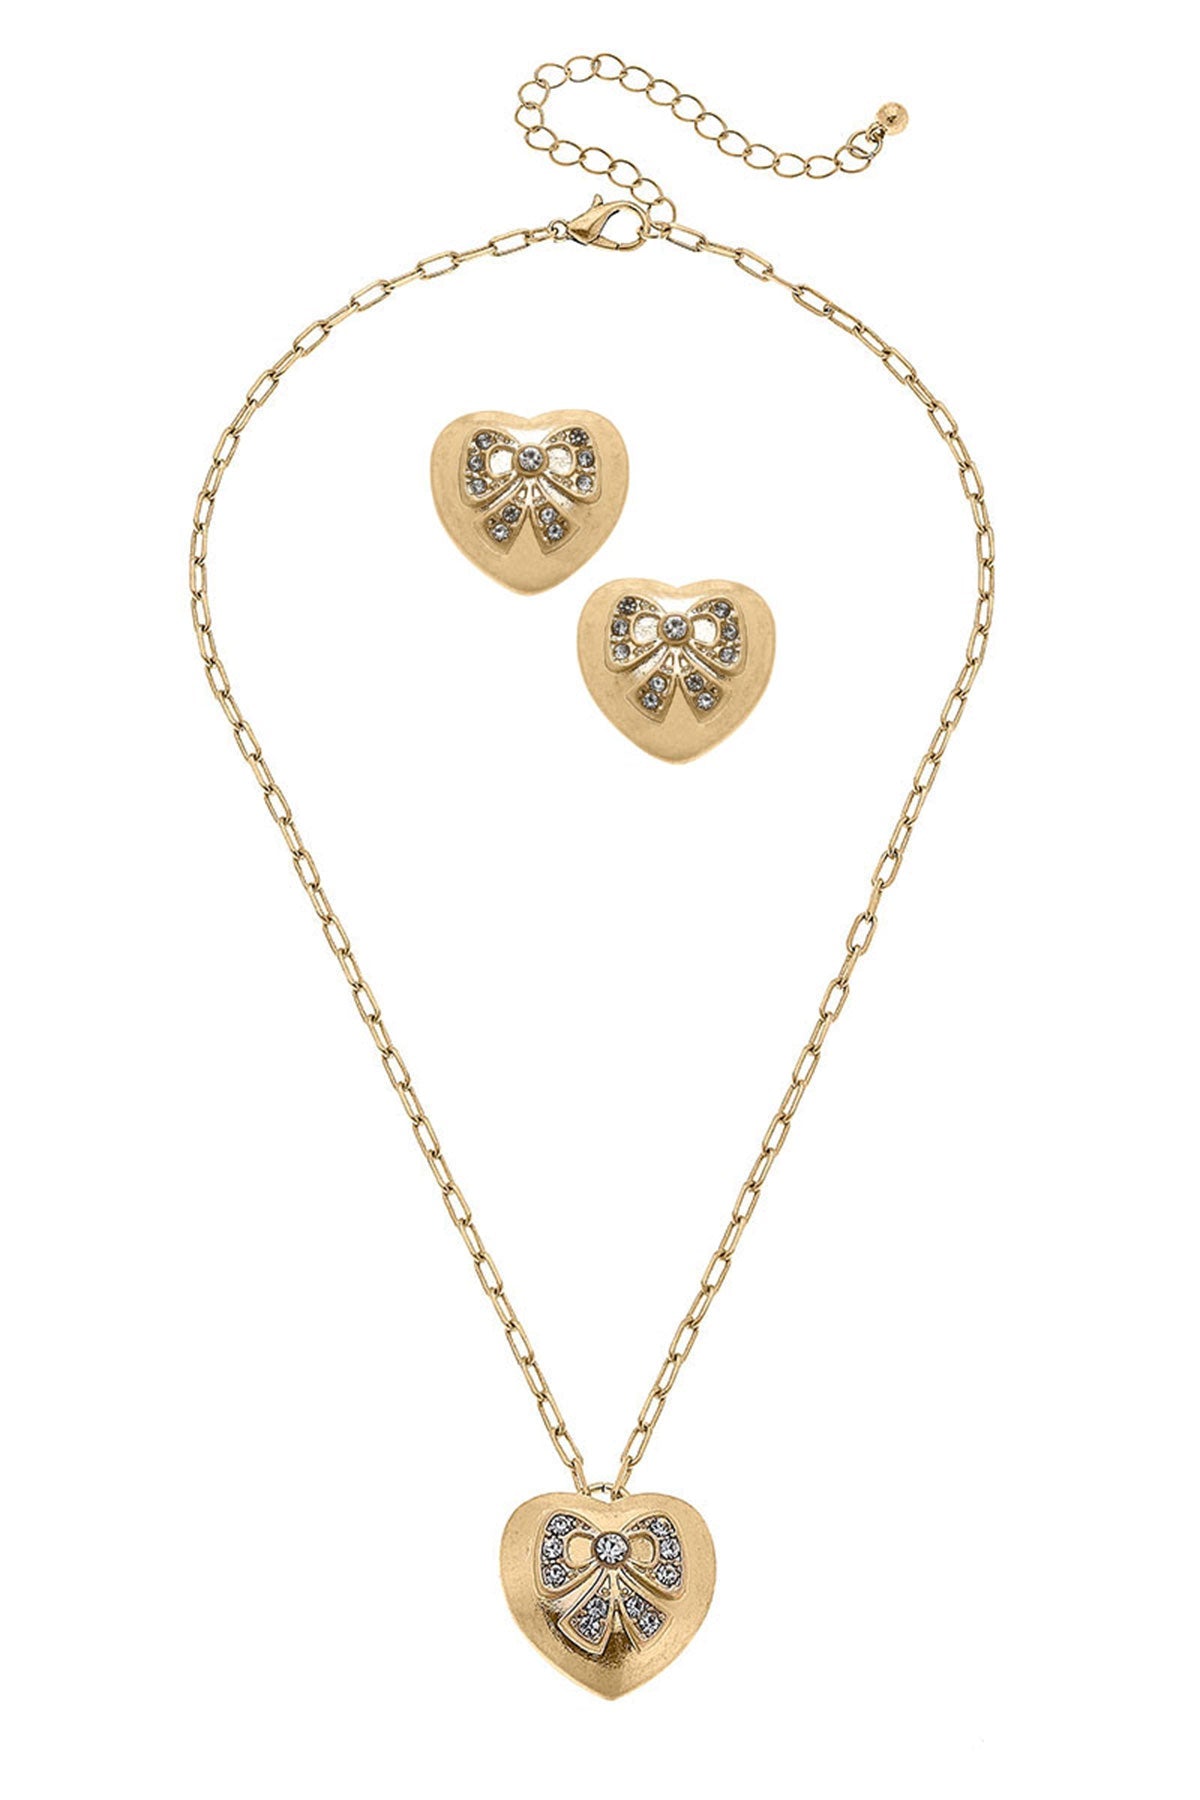 Rylan PavÃ© Bow Heart Earring and Necklace Set